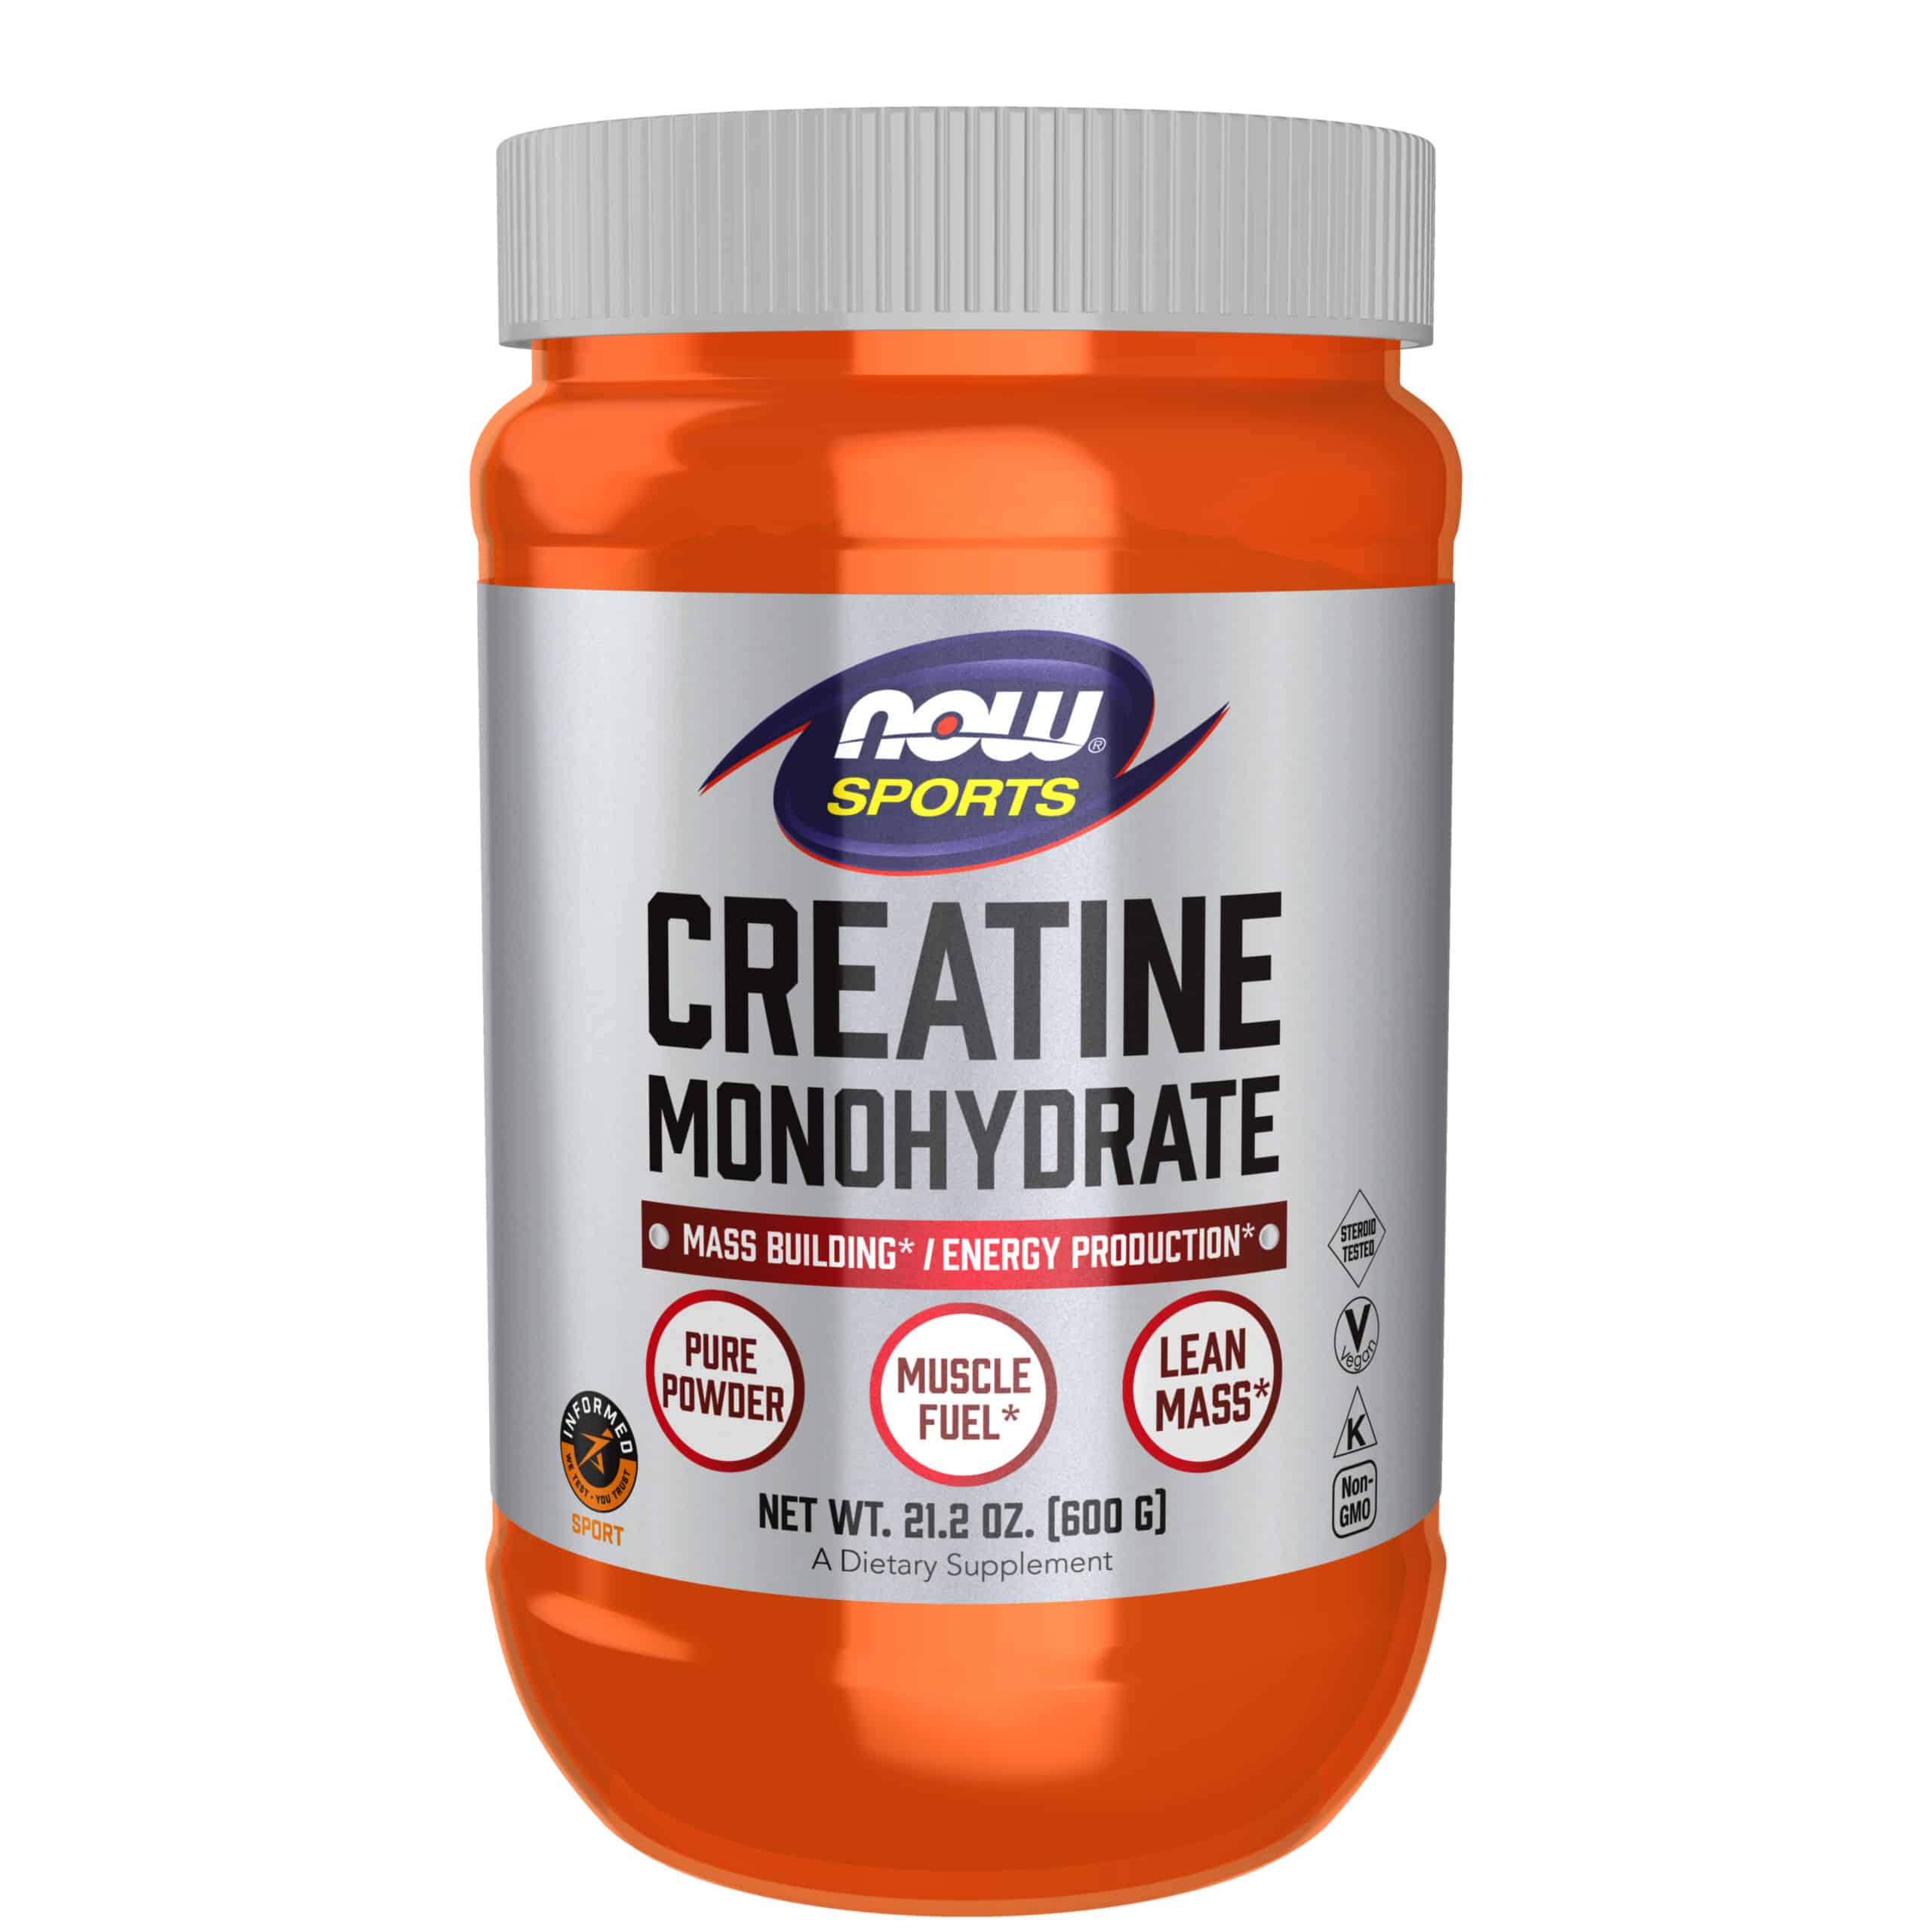 bottle of NOW sports creatine monohydrate